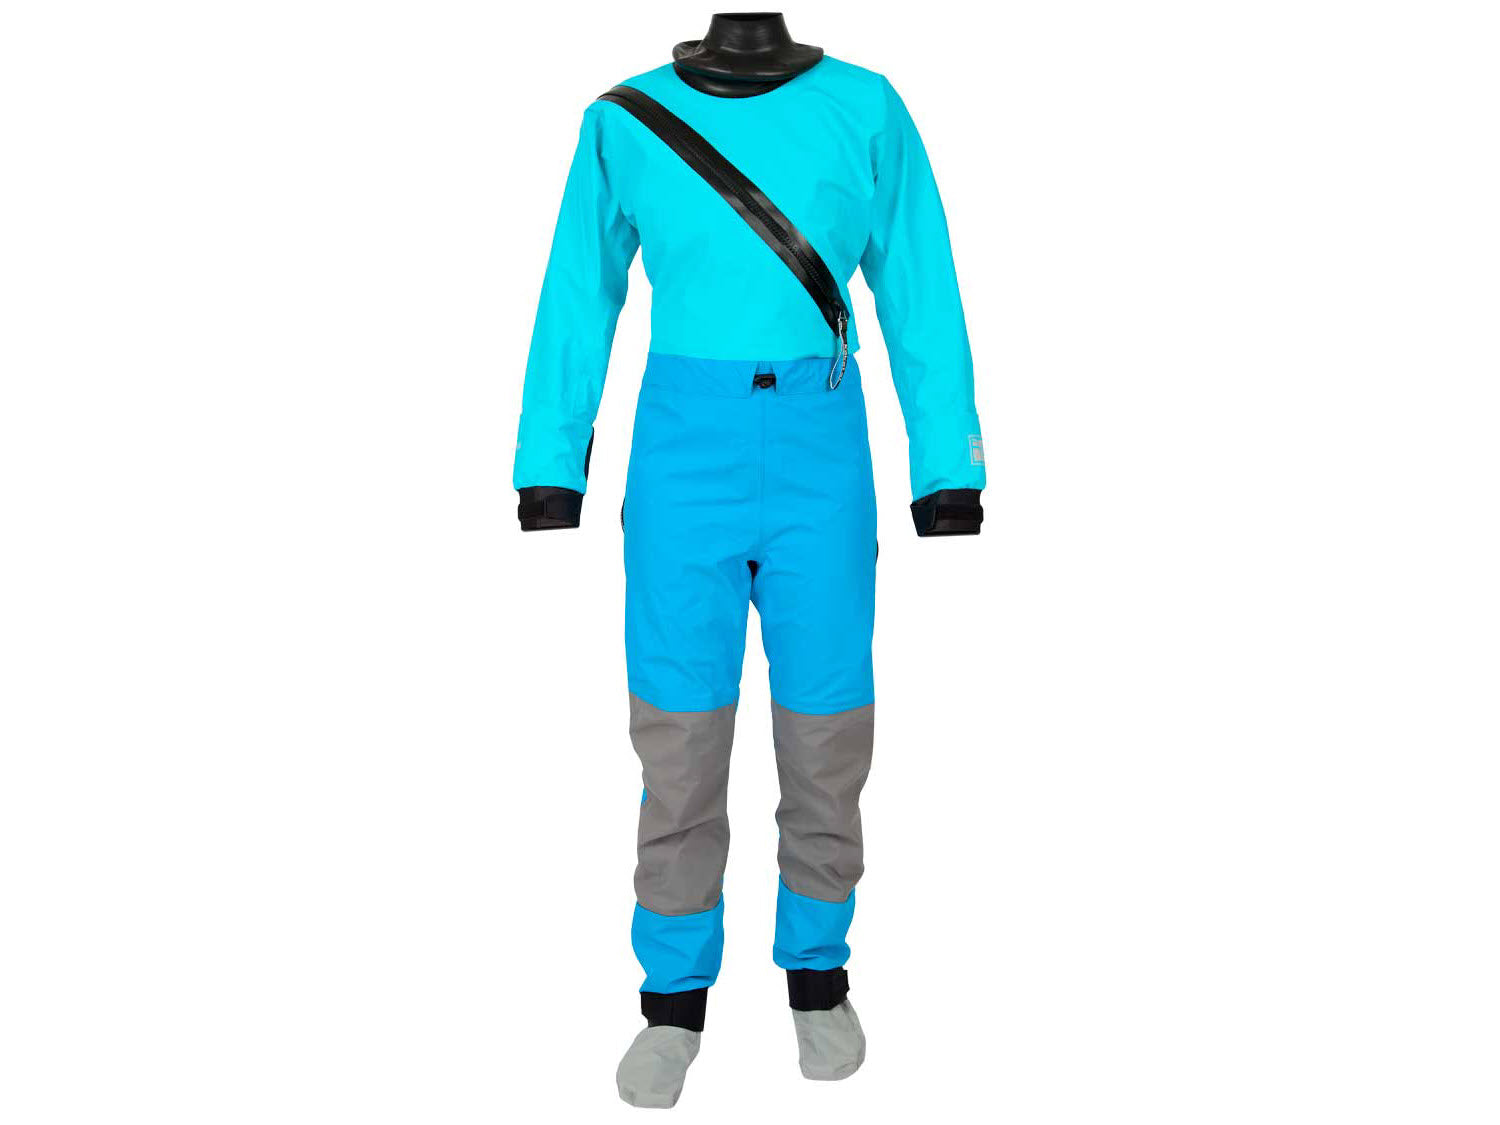 Dry Suit Rentals: Long Term 8 to 34 Days , Watersport Suits Kayaking Canoeing Rafting Sailing SUP Grand Canyon